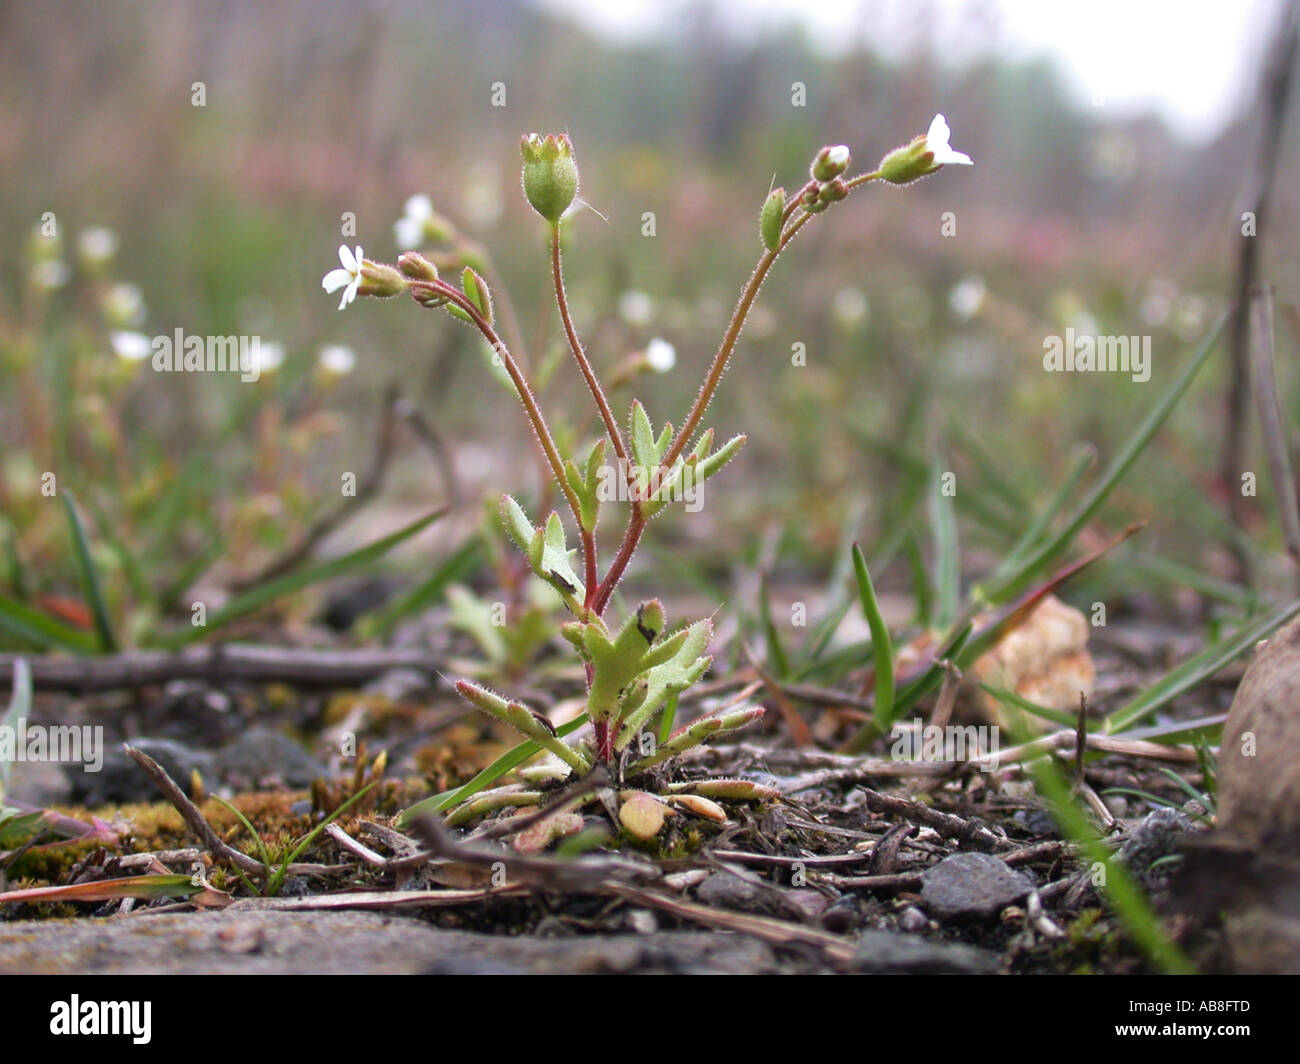 Saxifraga tridactylites (Saxifraga tridactylites), blooming plant on industrial ground Stock Photo